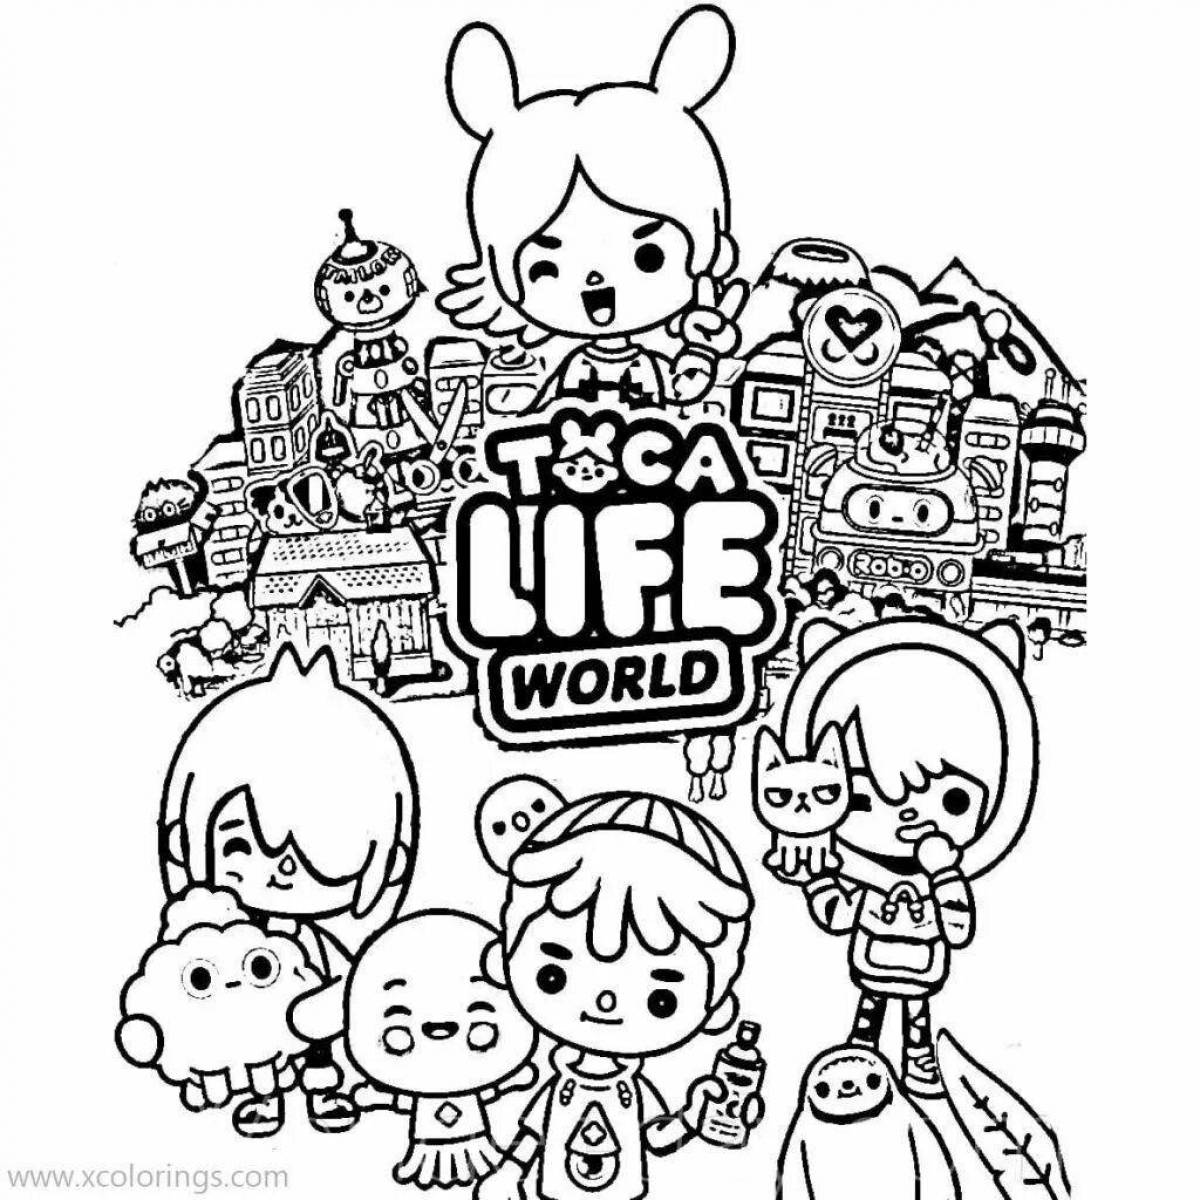 Fairytale coloring page toca life world